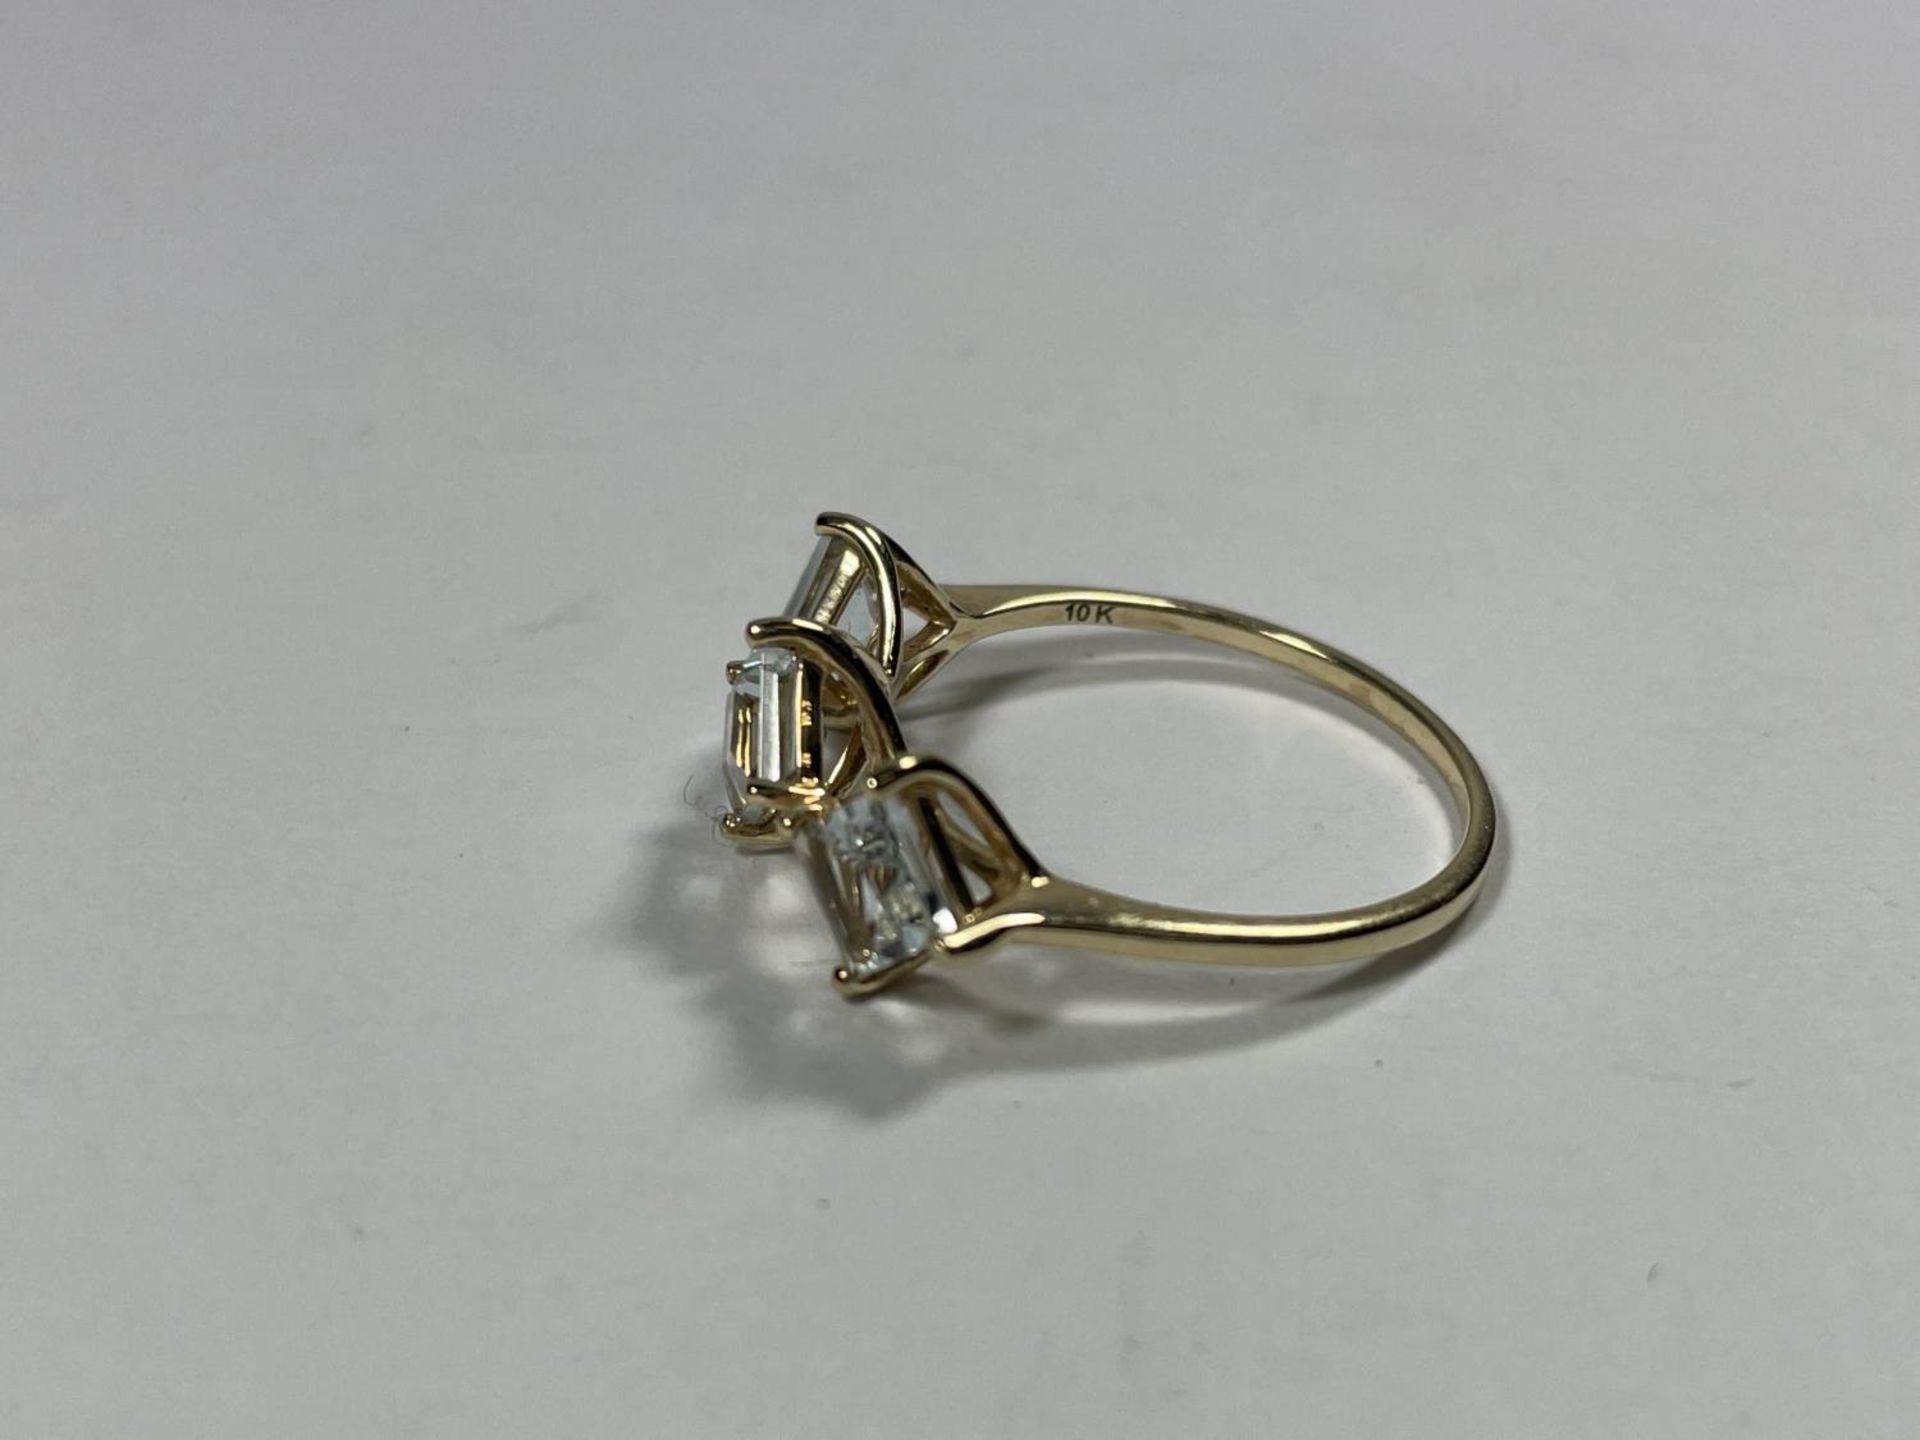 A 10 CARAT GOLD RING WITH THREE IN LINE DIAMOND SHAPED STONES SIZE S - Image 3 of 3